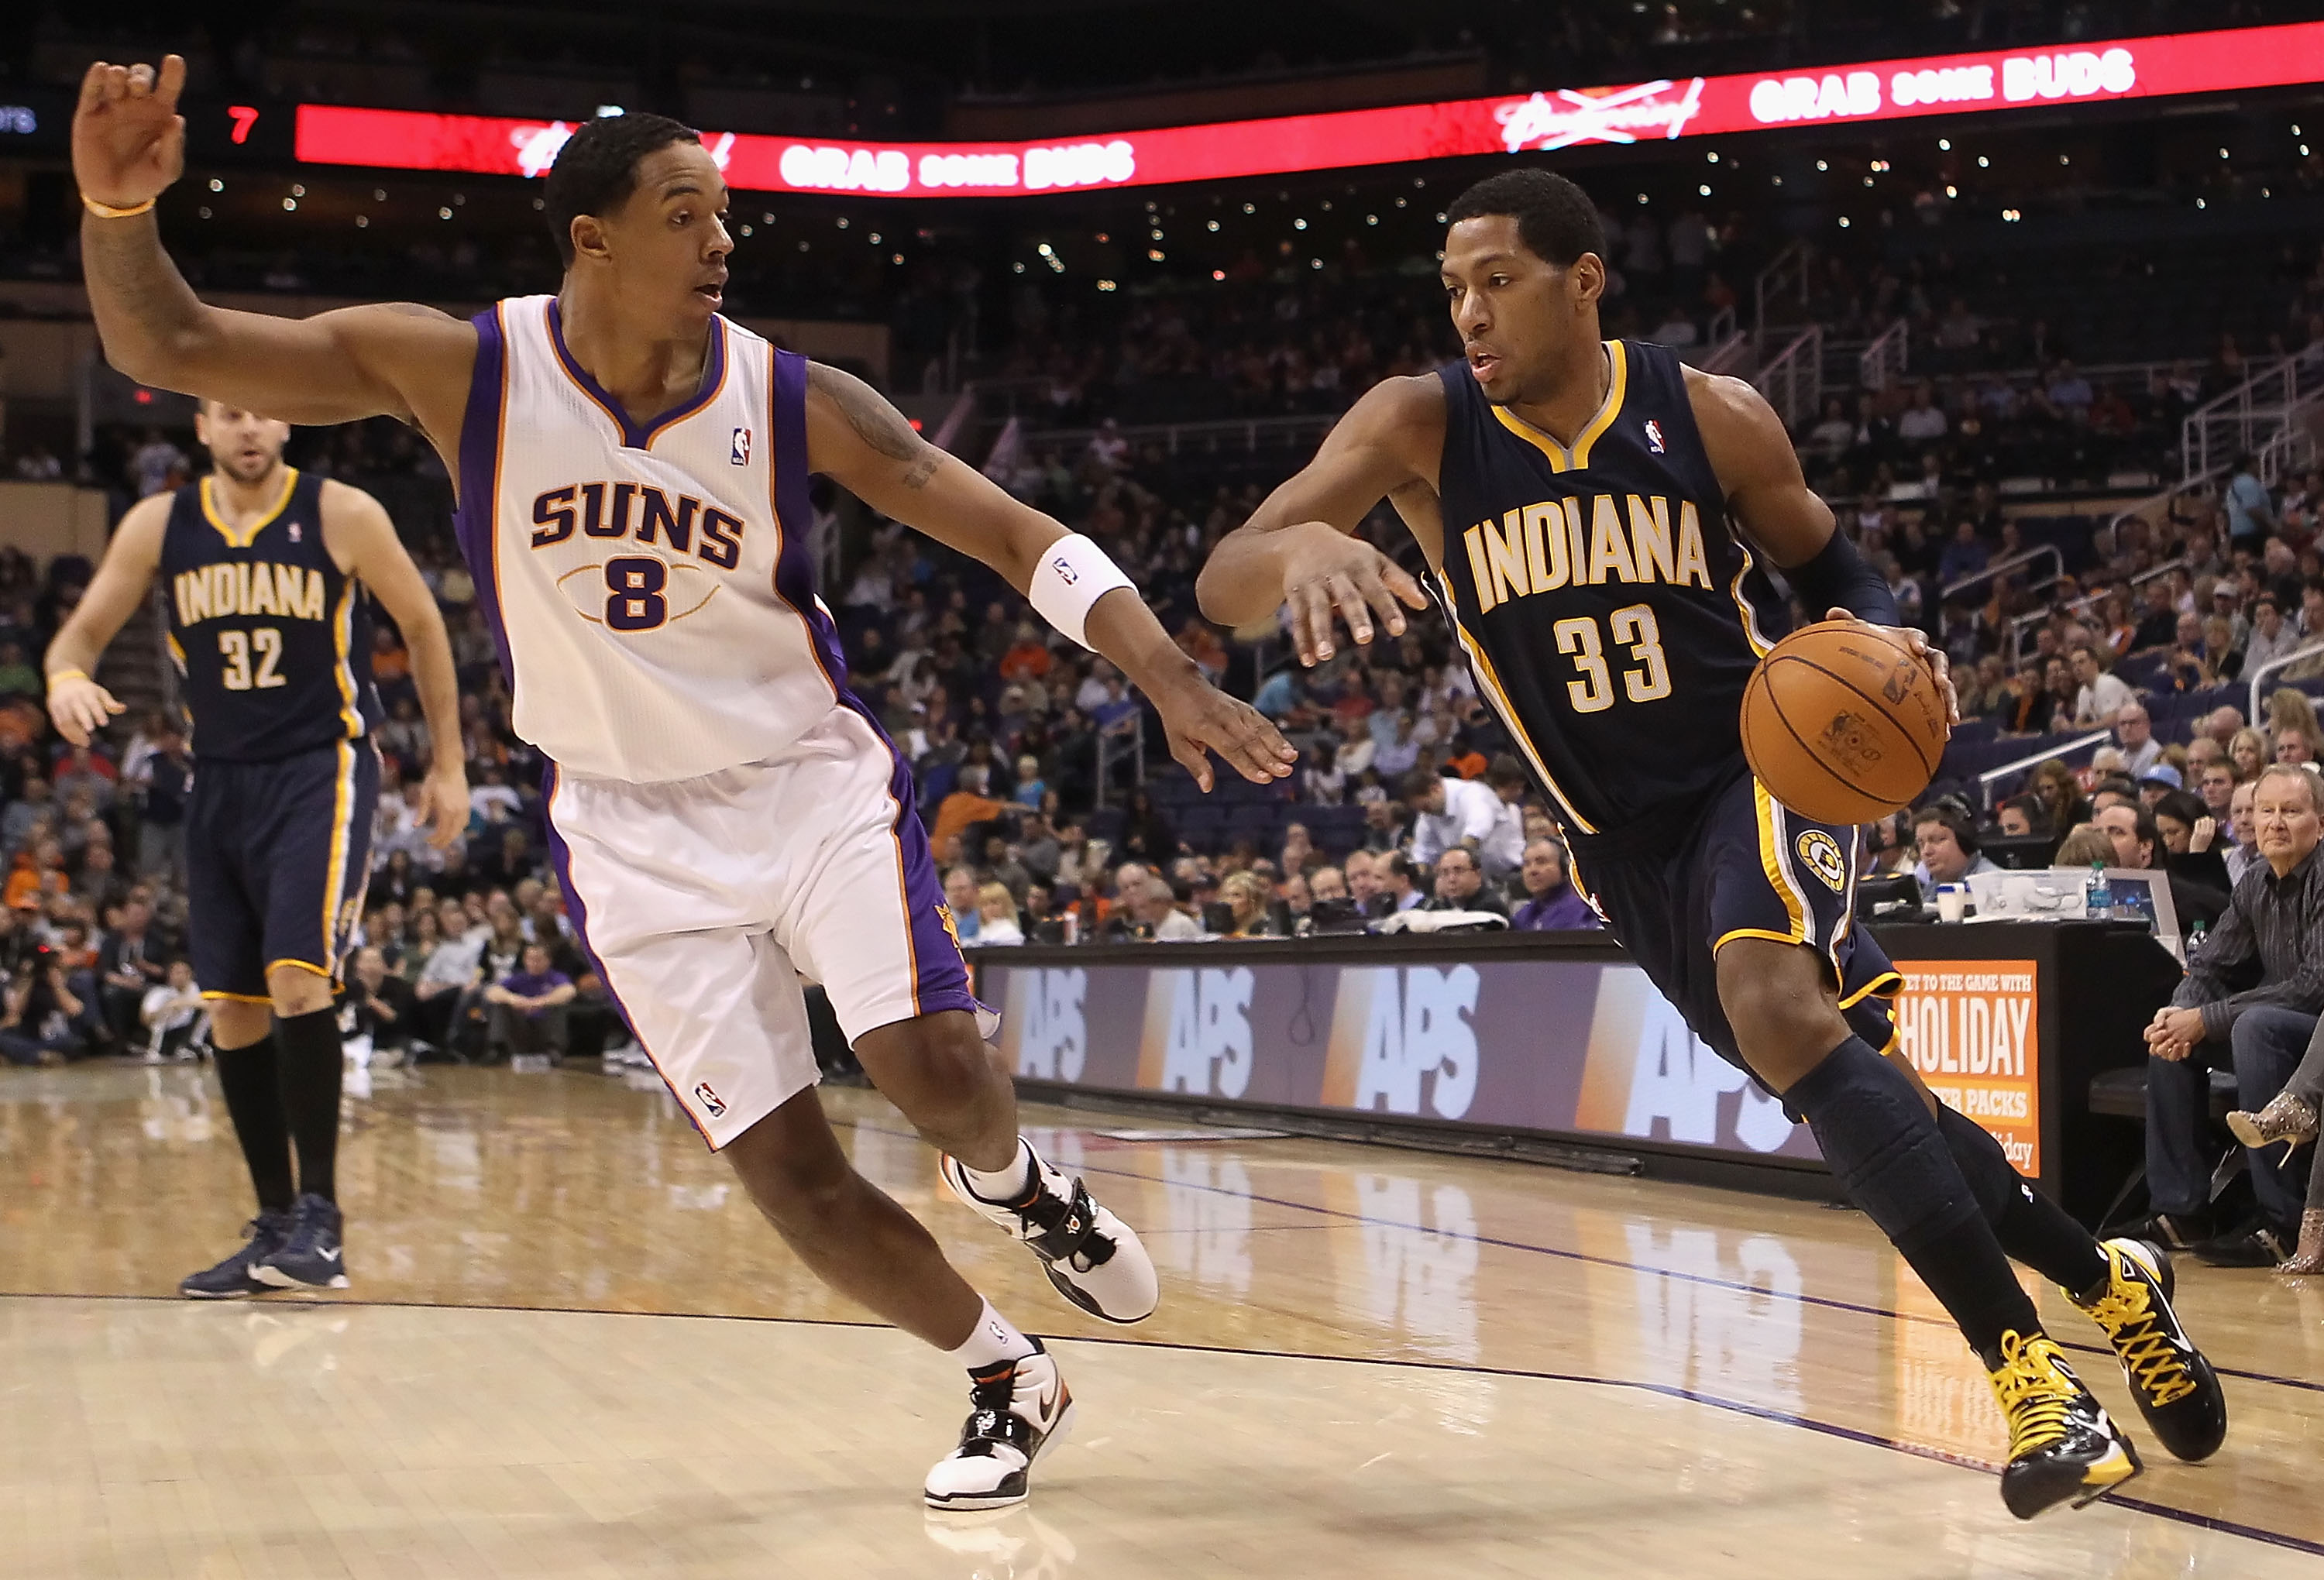 PHOENIX - DECEMBER 03:  Danny Granger #33 of the Indiana Pacers drives the ball against Channing Frye #8 of the Phoenix Suns during the NBA game at US Airways Center on December 3, 2010 in Phoenix, Arizona. NOTE TO USER: User expressly acknowledges and ag